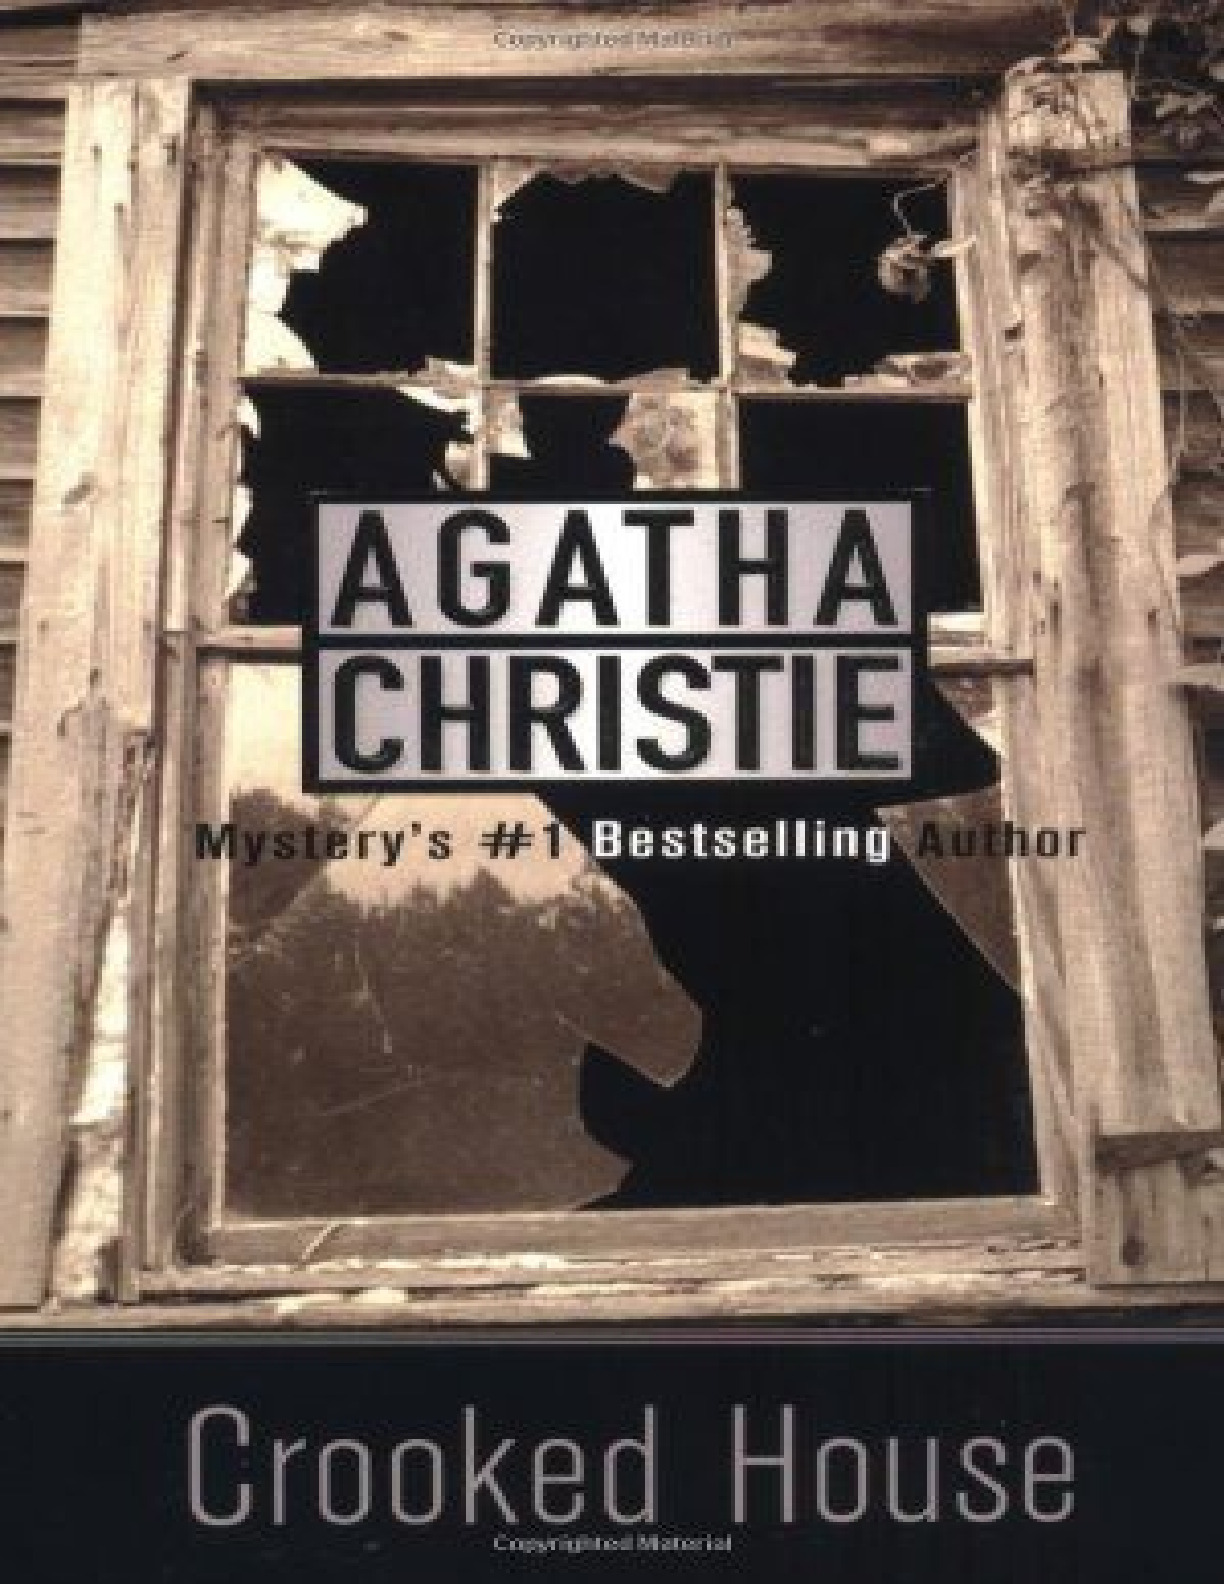 Crooked House – Agatha Christie